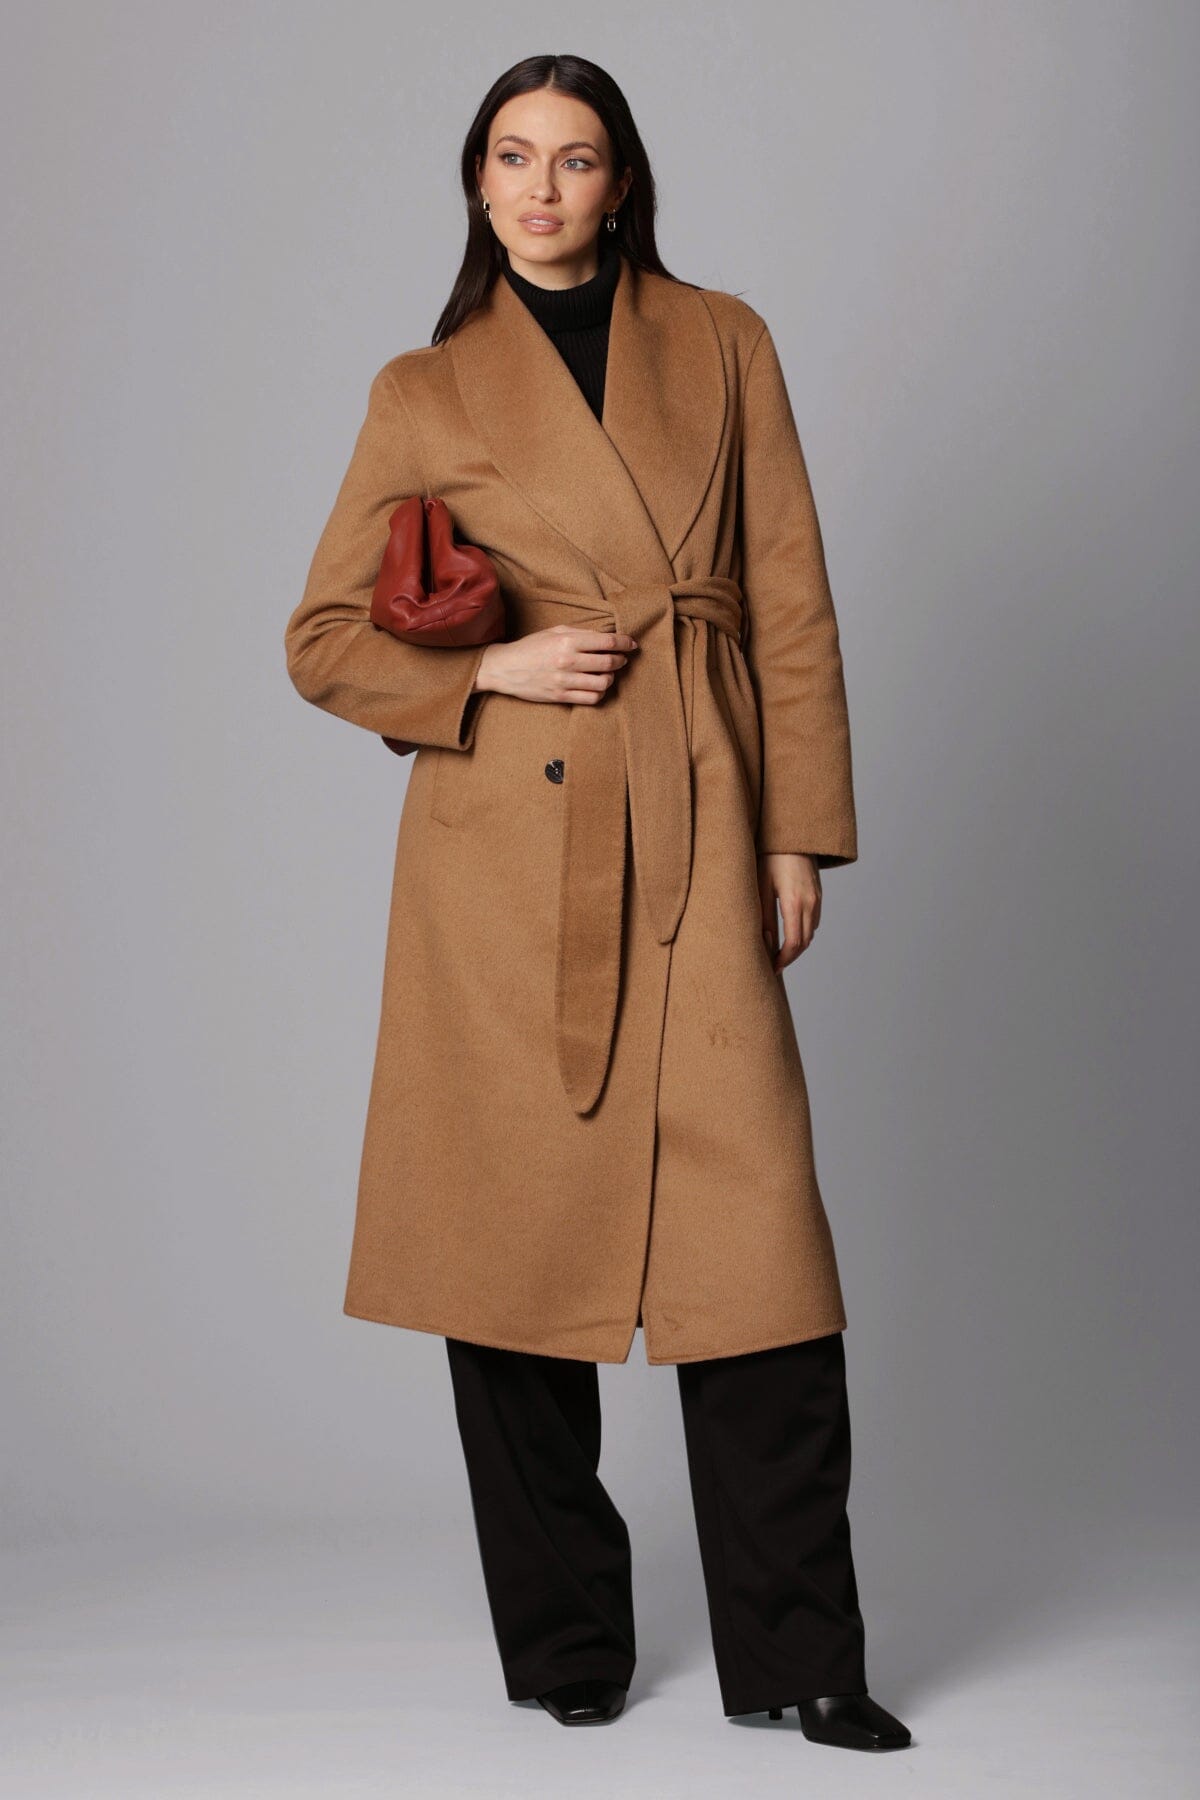 camel brown double face wrap mid length coat - figure flattering date night coats outerwear for women